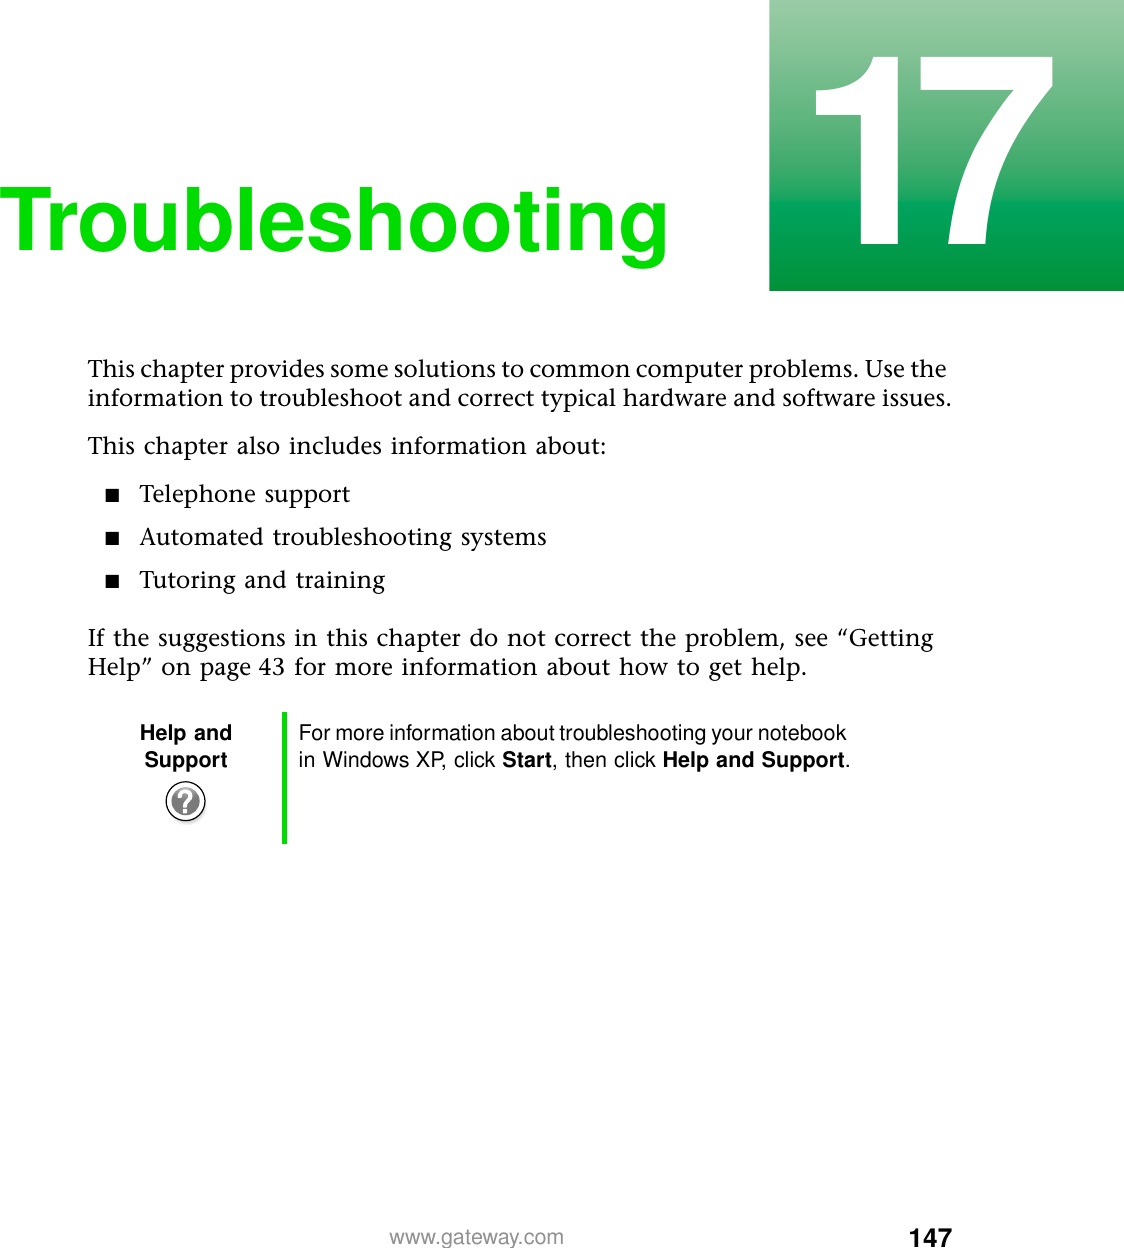 14717www.gateway.comTroubleshootingThis chapter provides some solutions to common computer problems. Use the information to troubleshoot and correct typical hardware and software issues.This chapter also includes information about:■Telephone support■Automated troubleshooting systems■Tutoring and trainingIf the suggestions in this chapter do not correct the problem, see “Getting Help” on page 43 for more information about how to get help.Help and Support For more information about troubleshooting your notebook in Windows XP, click Start, then click Help and Support.